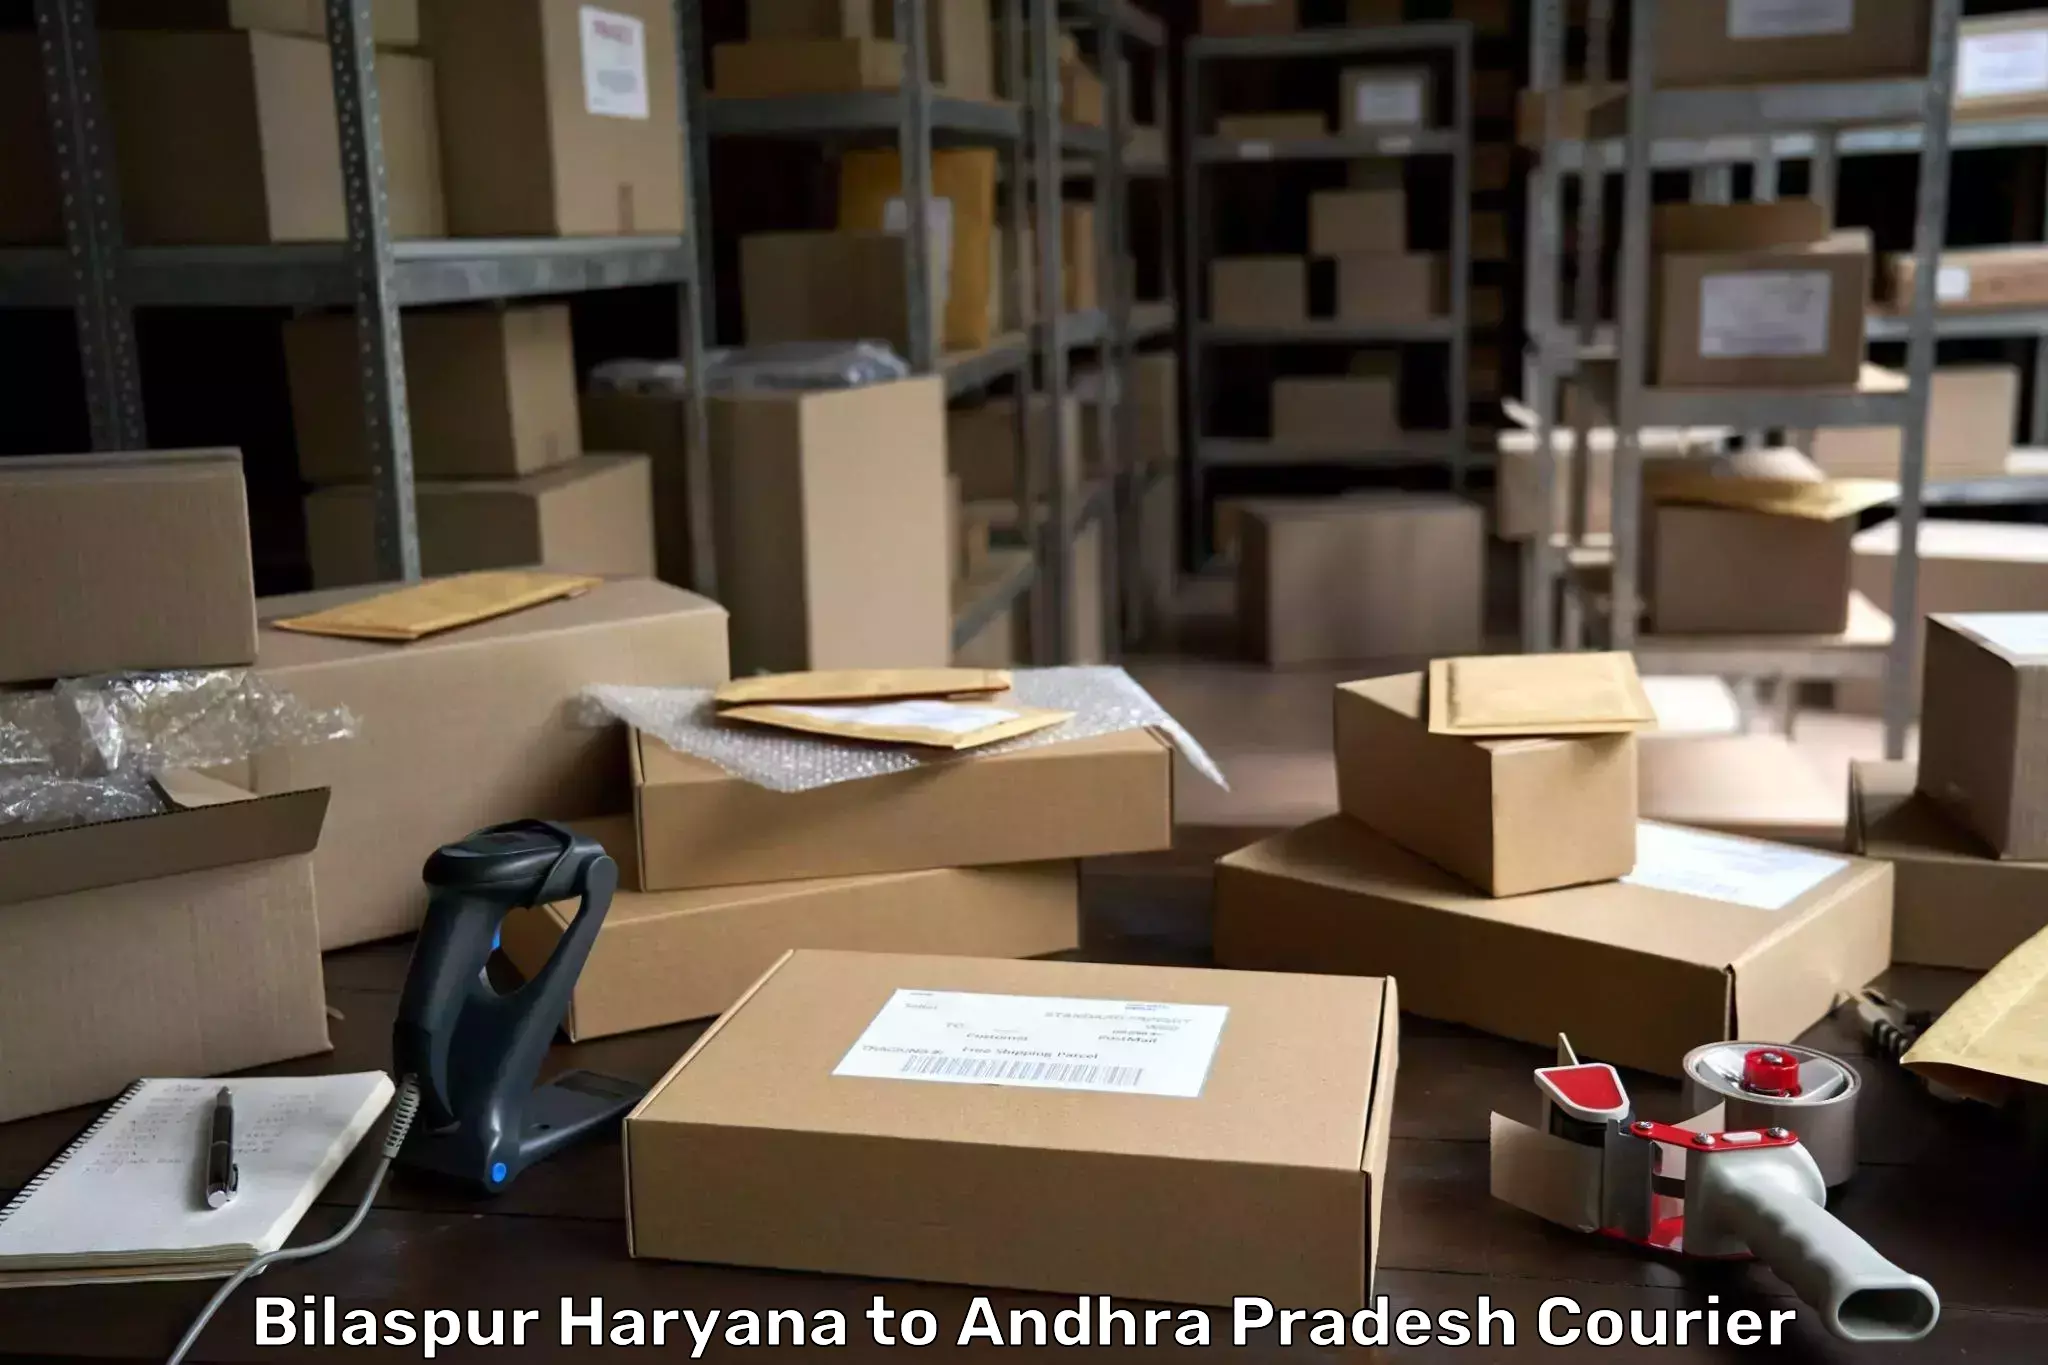 Easy access courier services Bilaspur Haryana to Gollaprollu